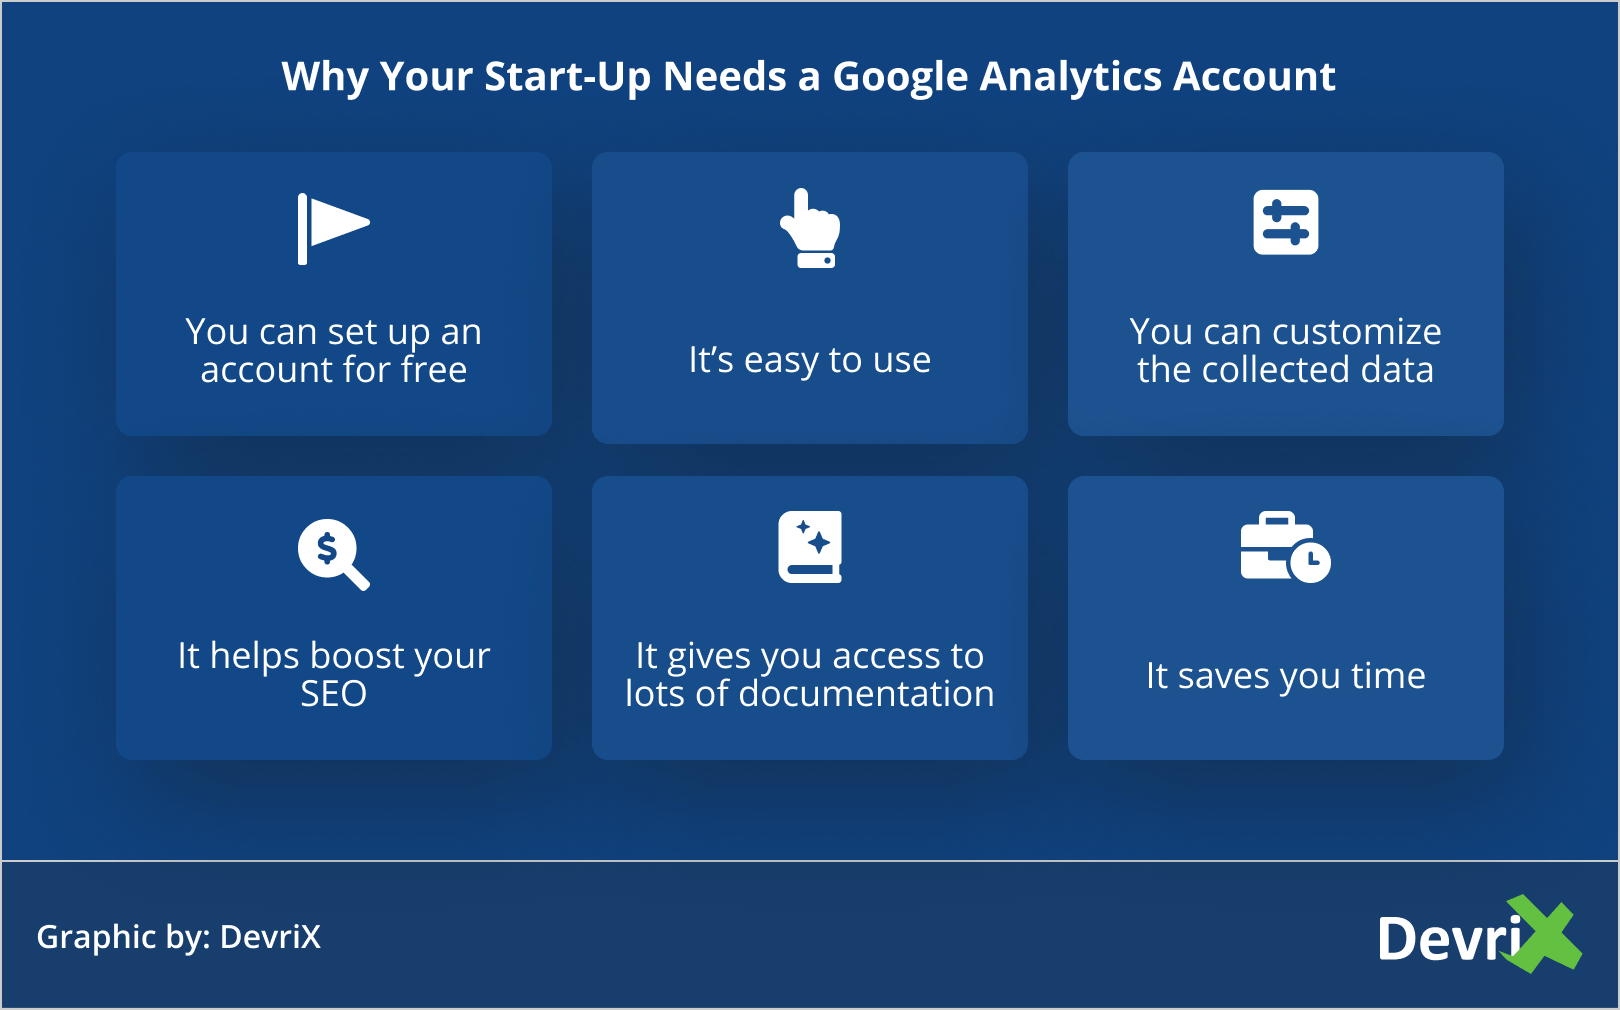 Why Your Start-Up Needs a Google Analytics Account